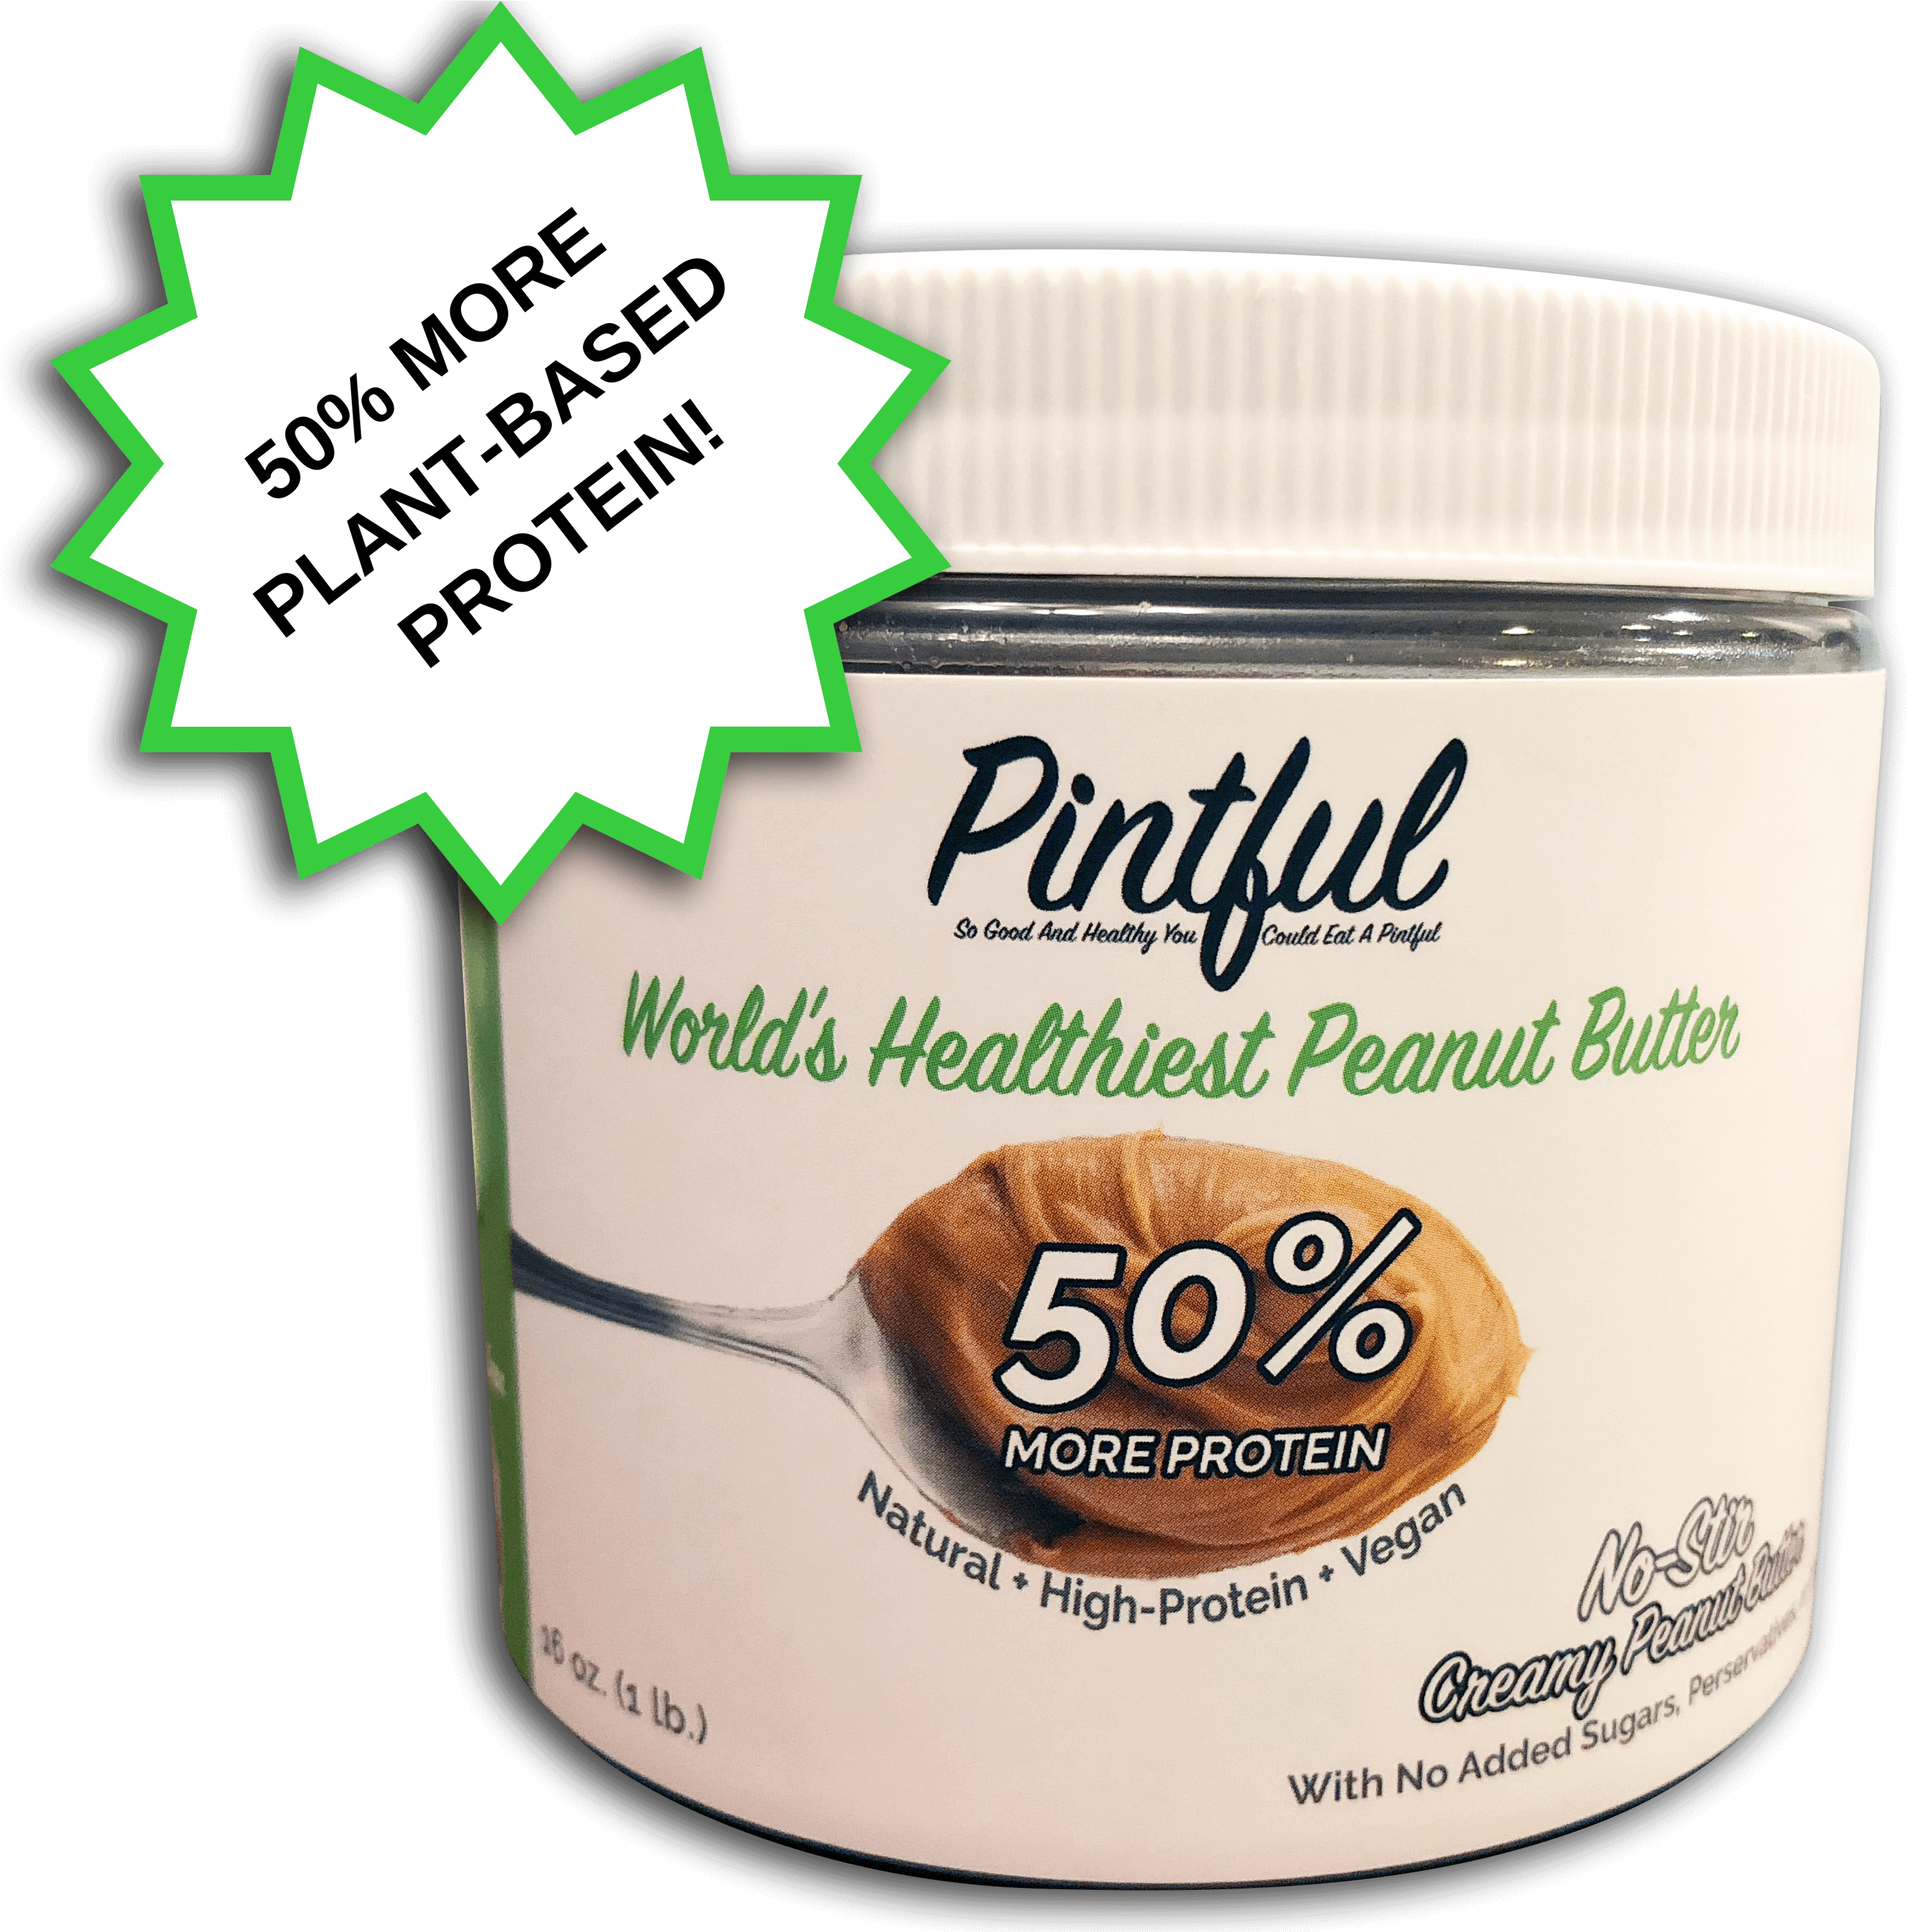 Pintful Peanut Butter Pint With 50% More Protein - Peanut Butter (4032x3024), Png Download